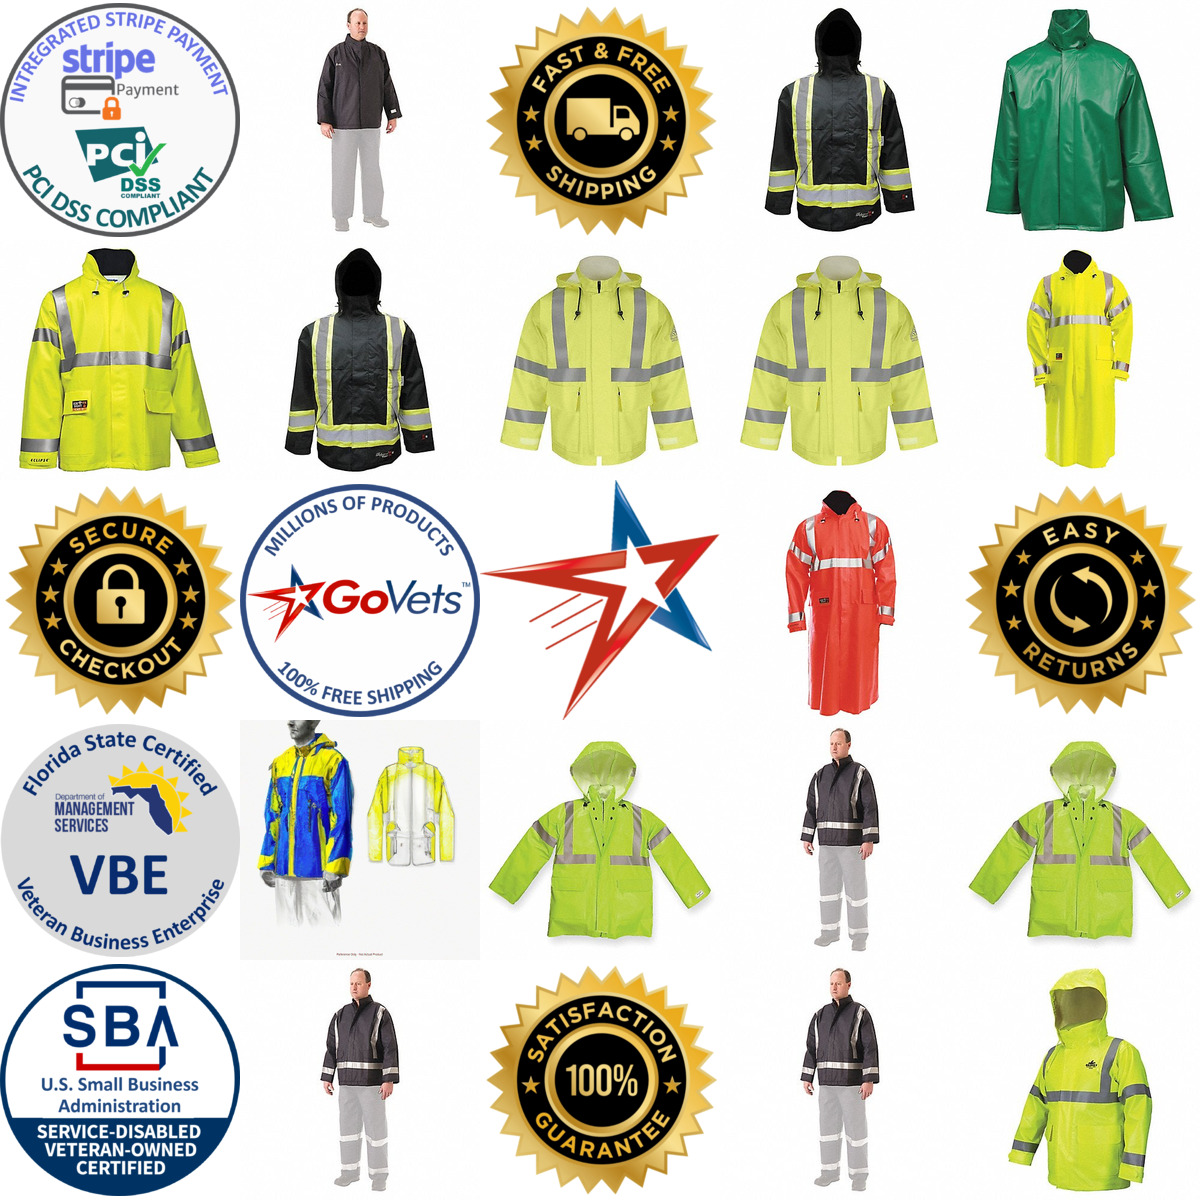 A selection of Flame Resistant and Arc Flash Rain Jackets and Coa products on GoVets